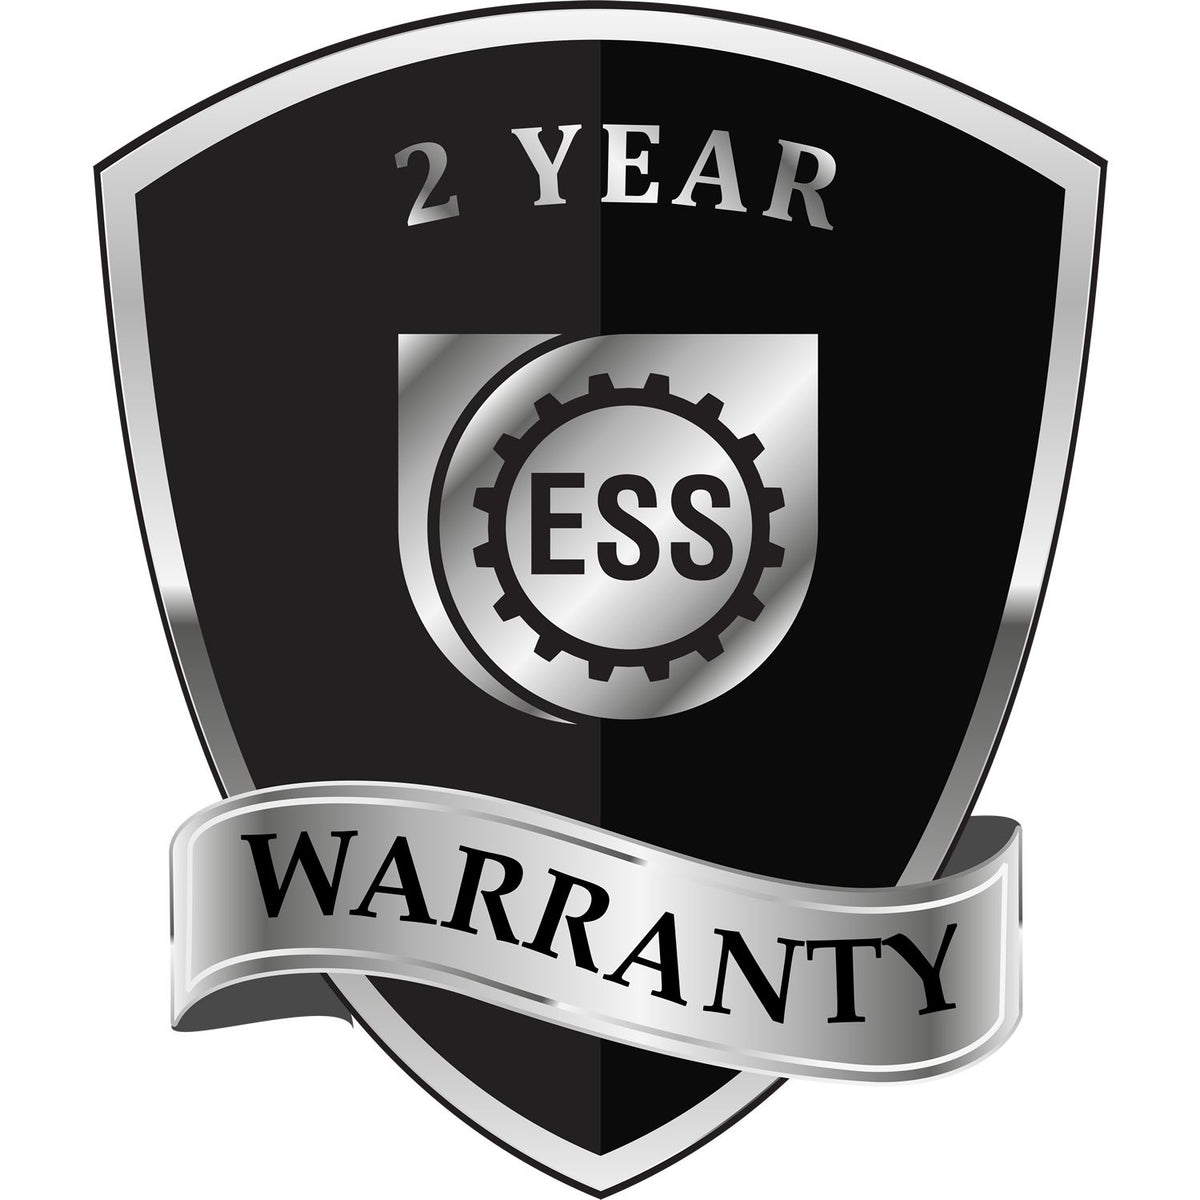 A badge or emblem showing a warranty icon for the Heavy Duty Cast Iron Georgia Architect Embosser